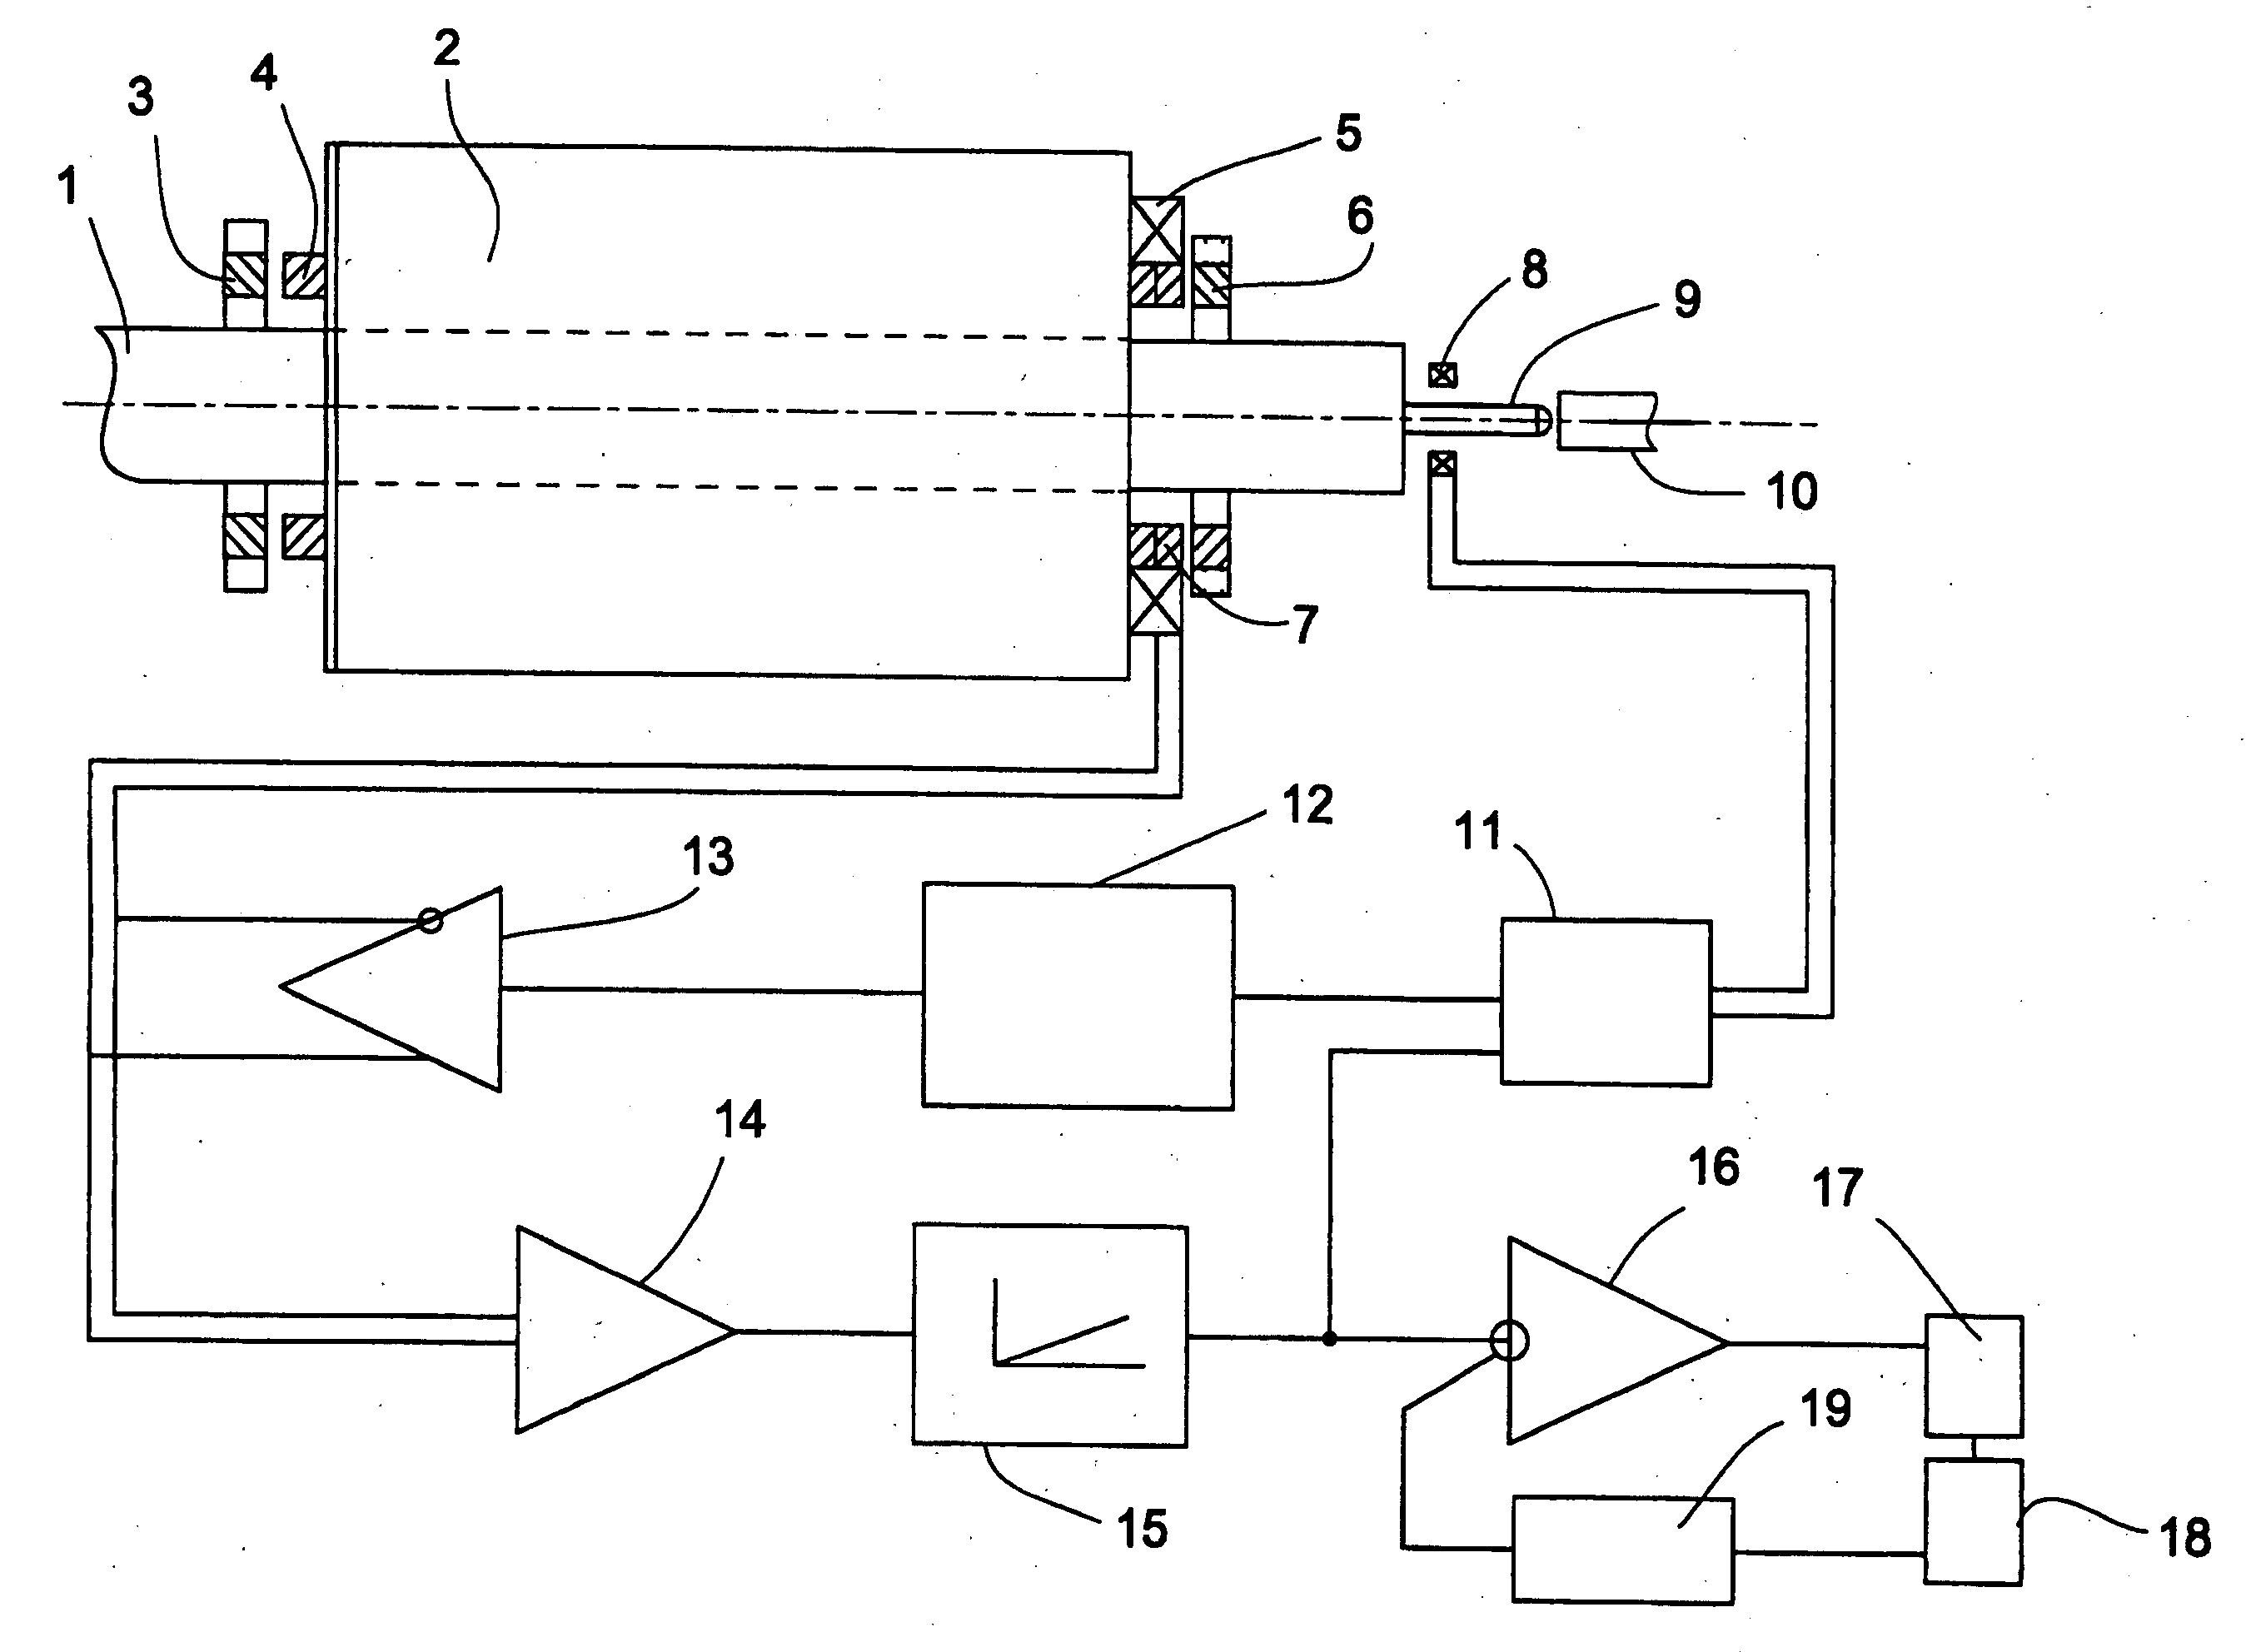 Method for Operating an Electromotive Drive